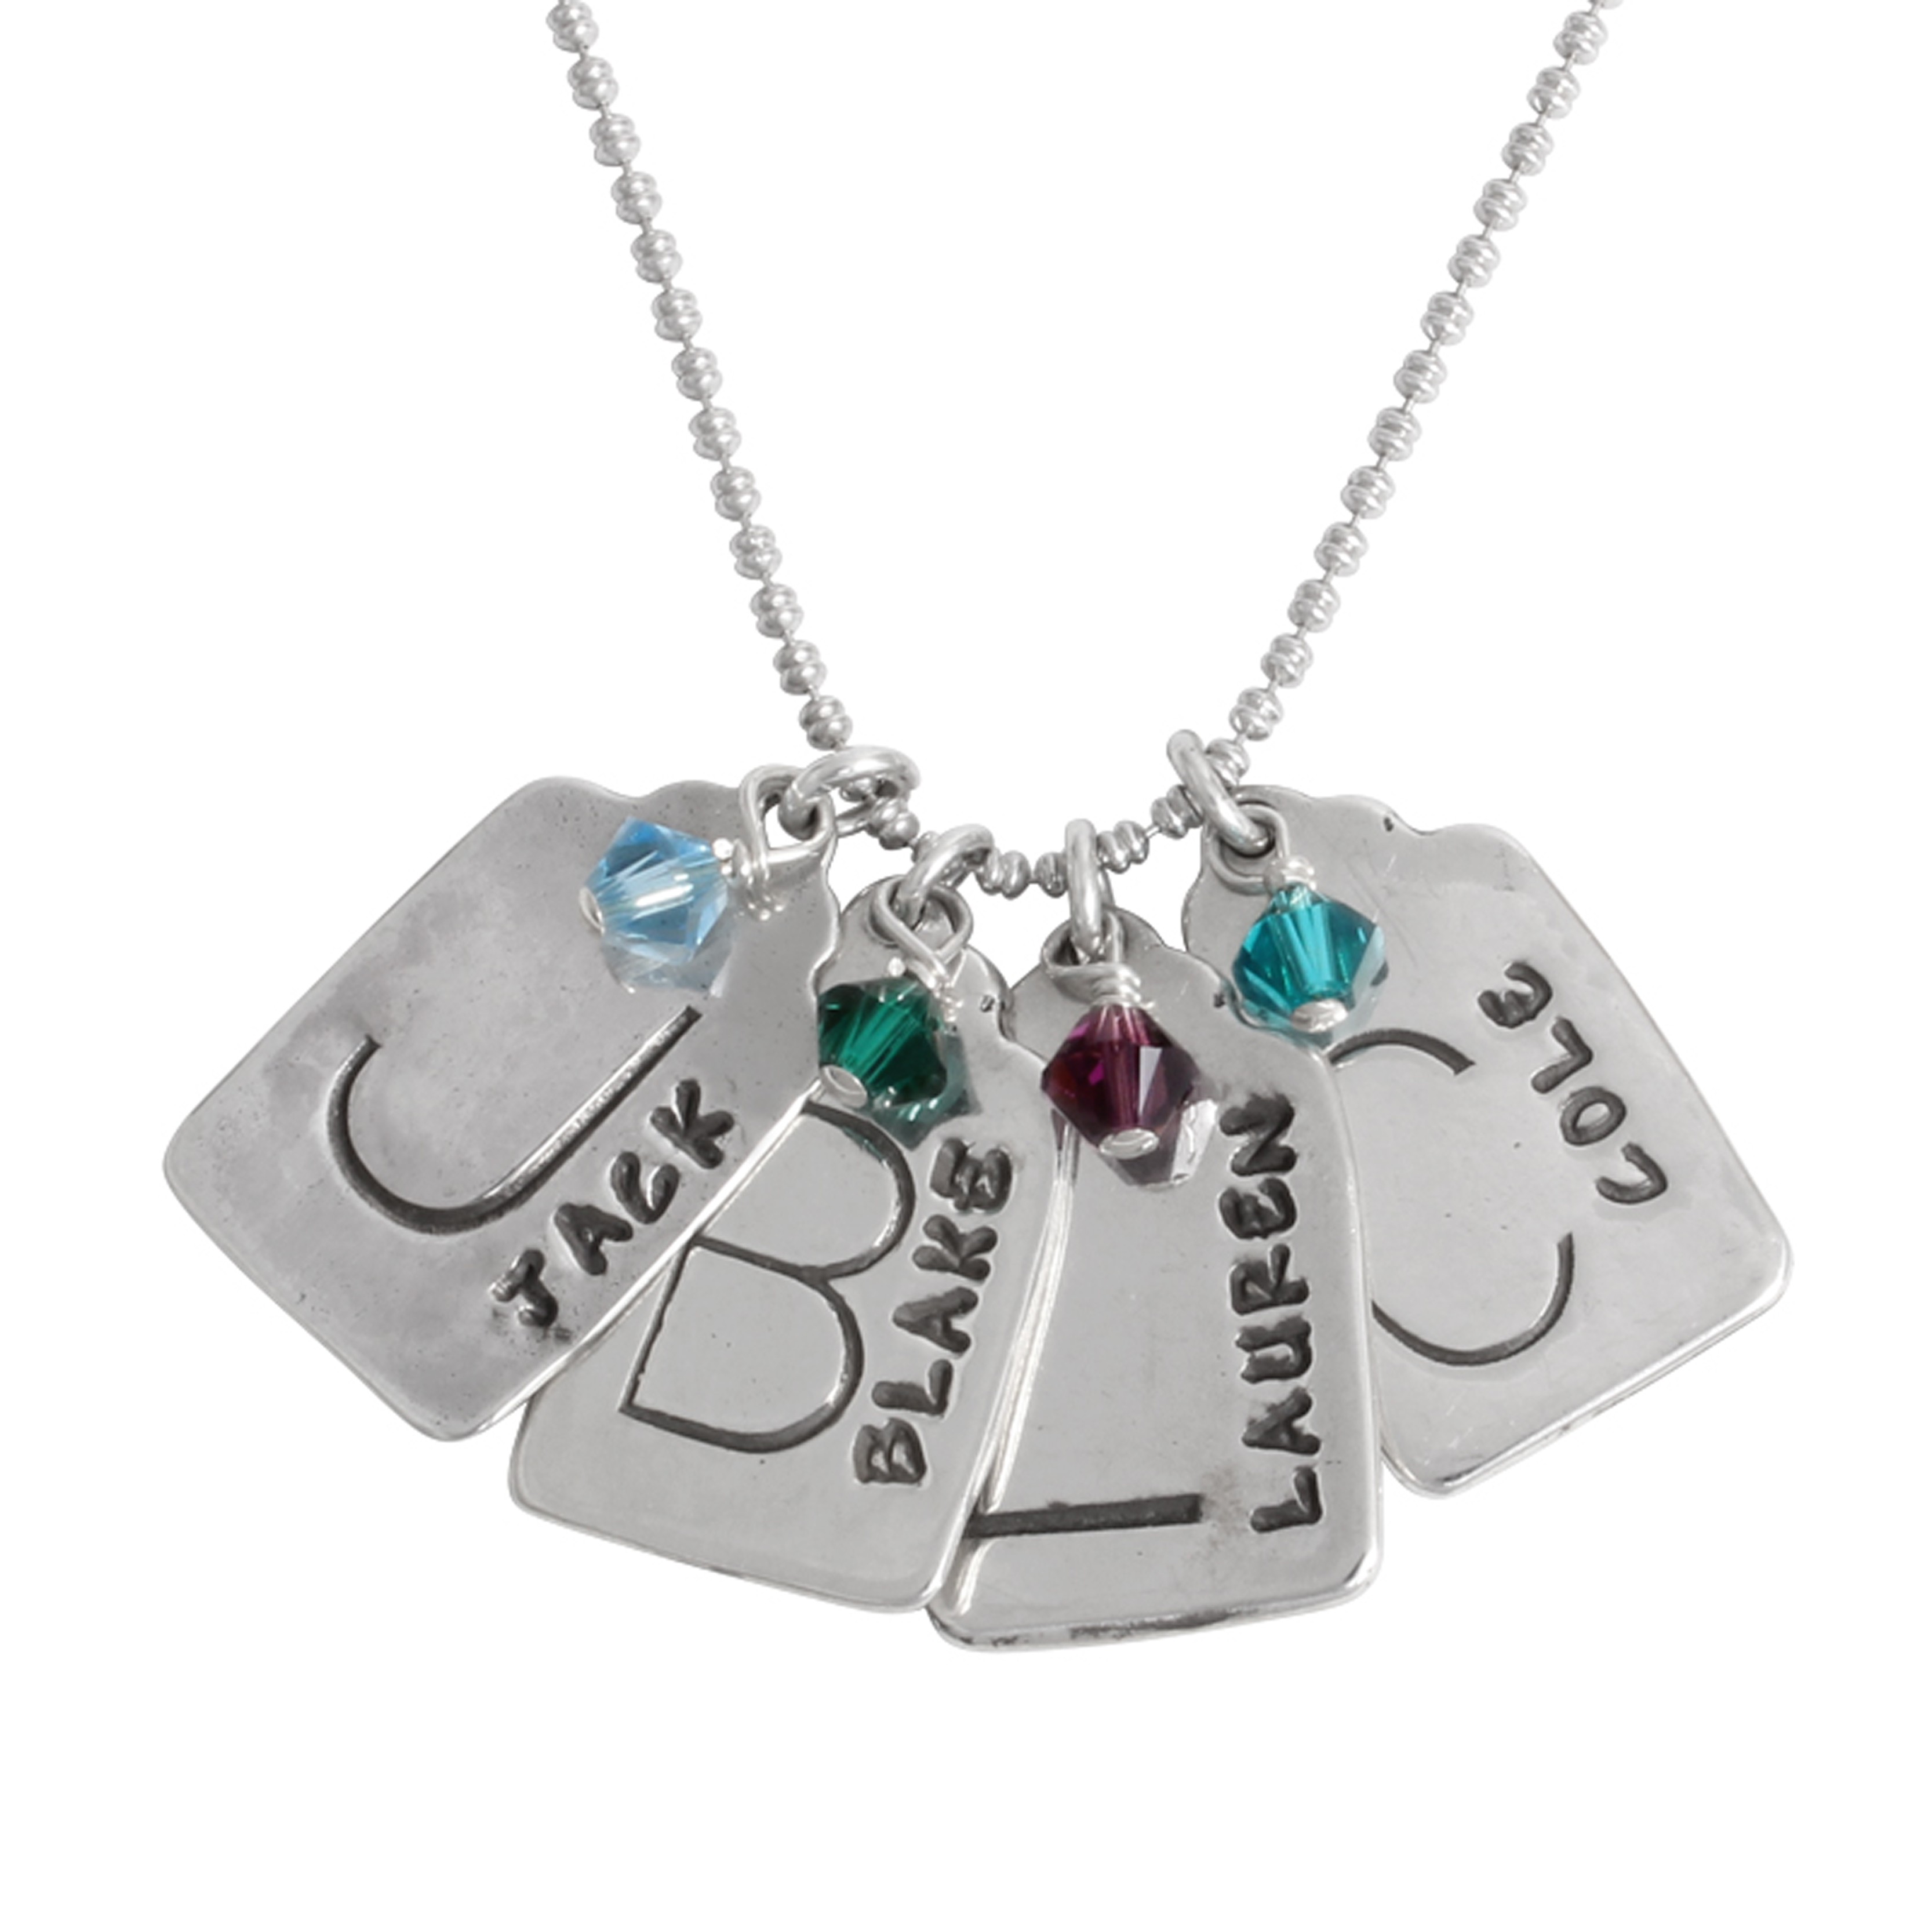 Mother's charm necklace with names